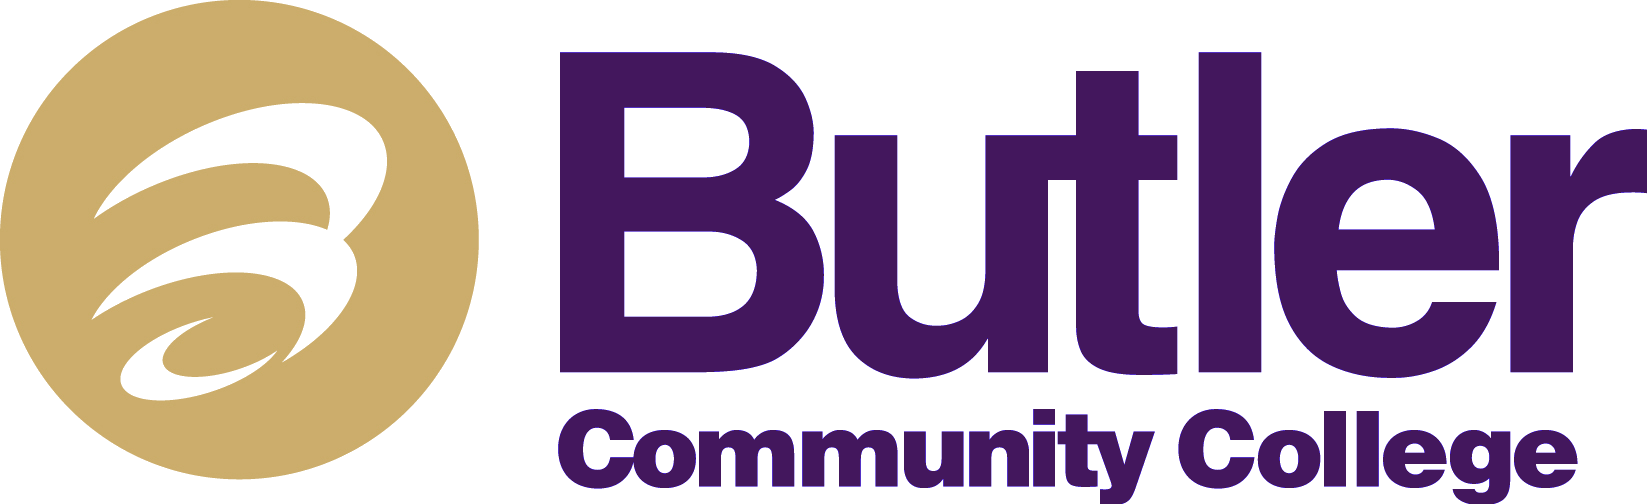 Transfer college credits from Butler Community College